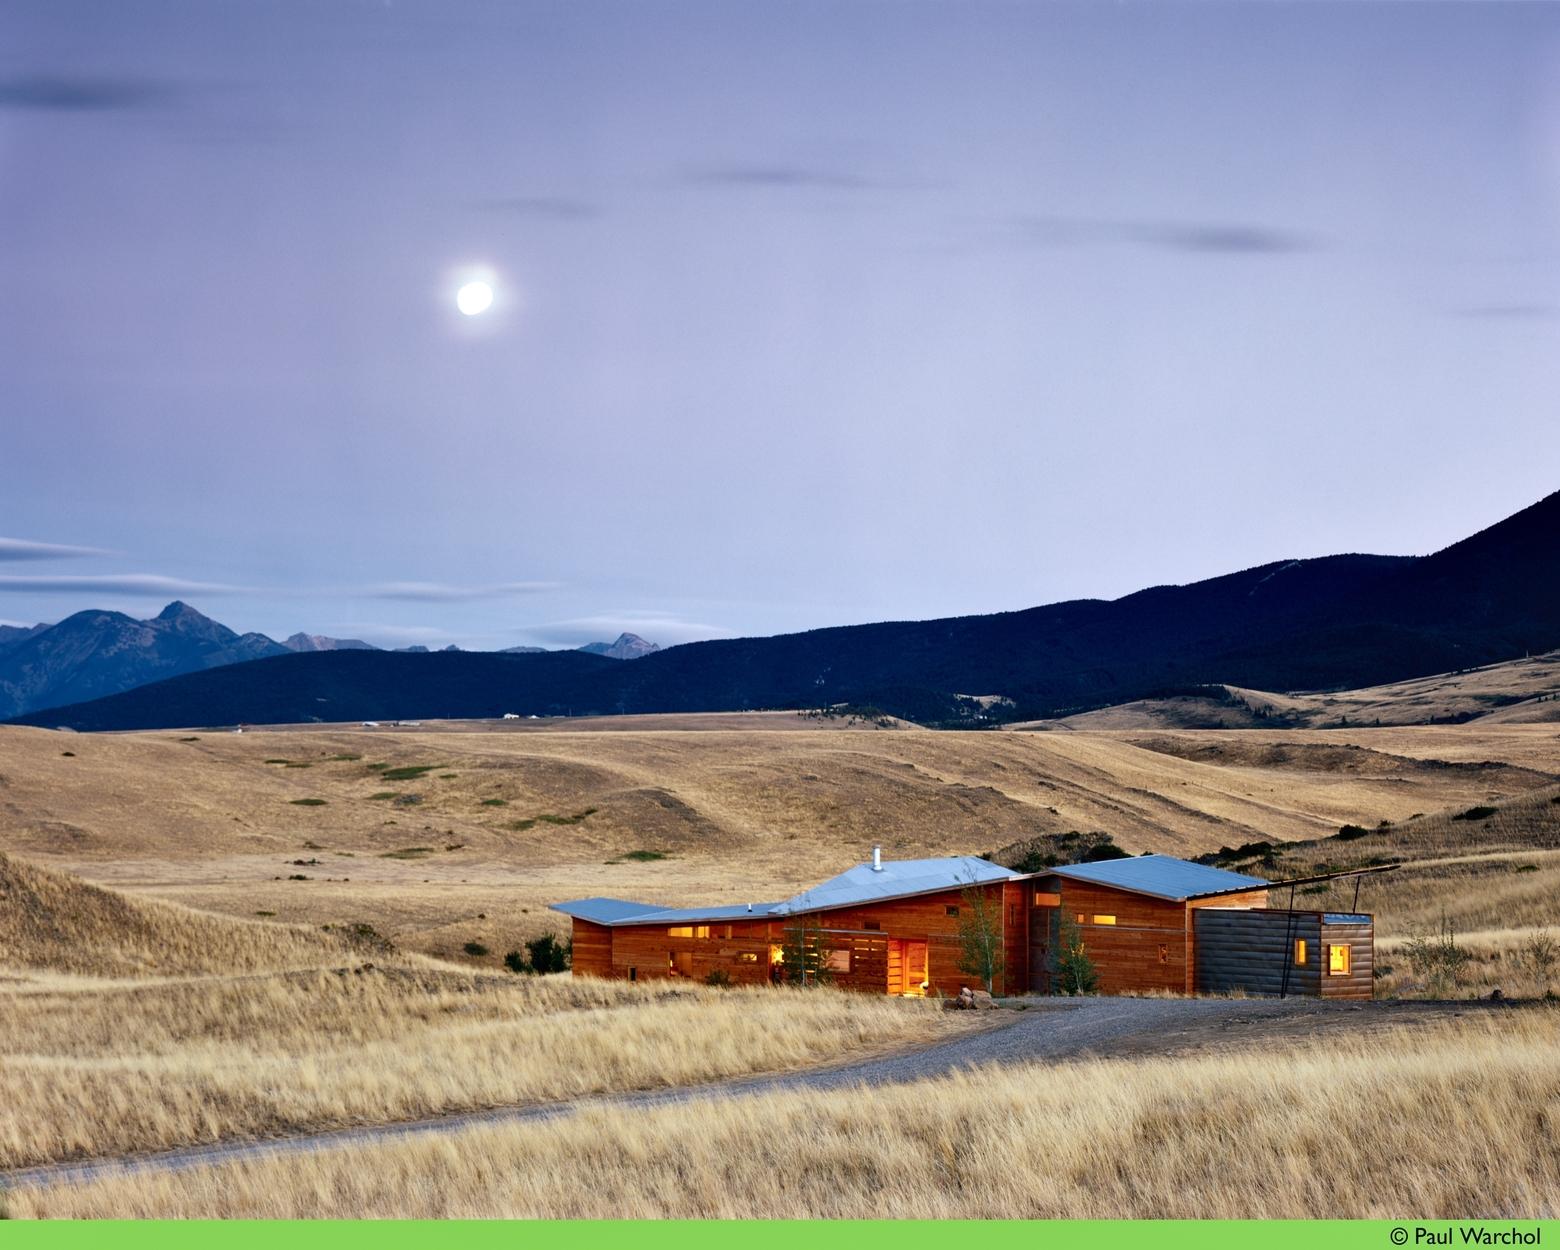 Located on a 45-acre parcel of natural land, this house sits between the folds of rising hills hidden from view and was the author's first home design.  Fencing was removed to allow for elk migration and other wildlife to roam freely and safely. Photo courtesy Paul Warchol (warcholphotography.com)